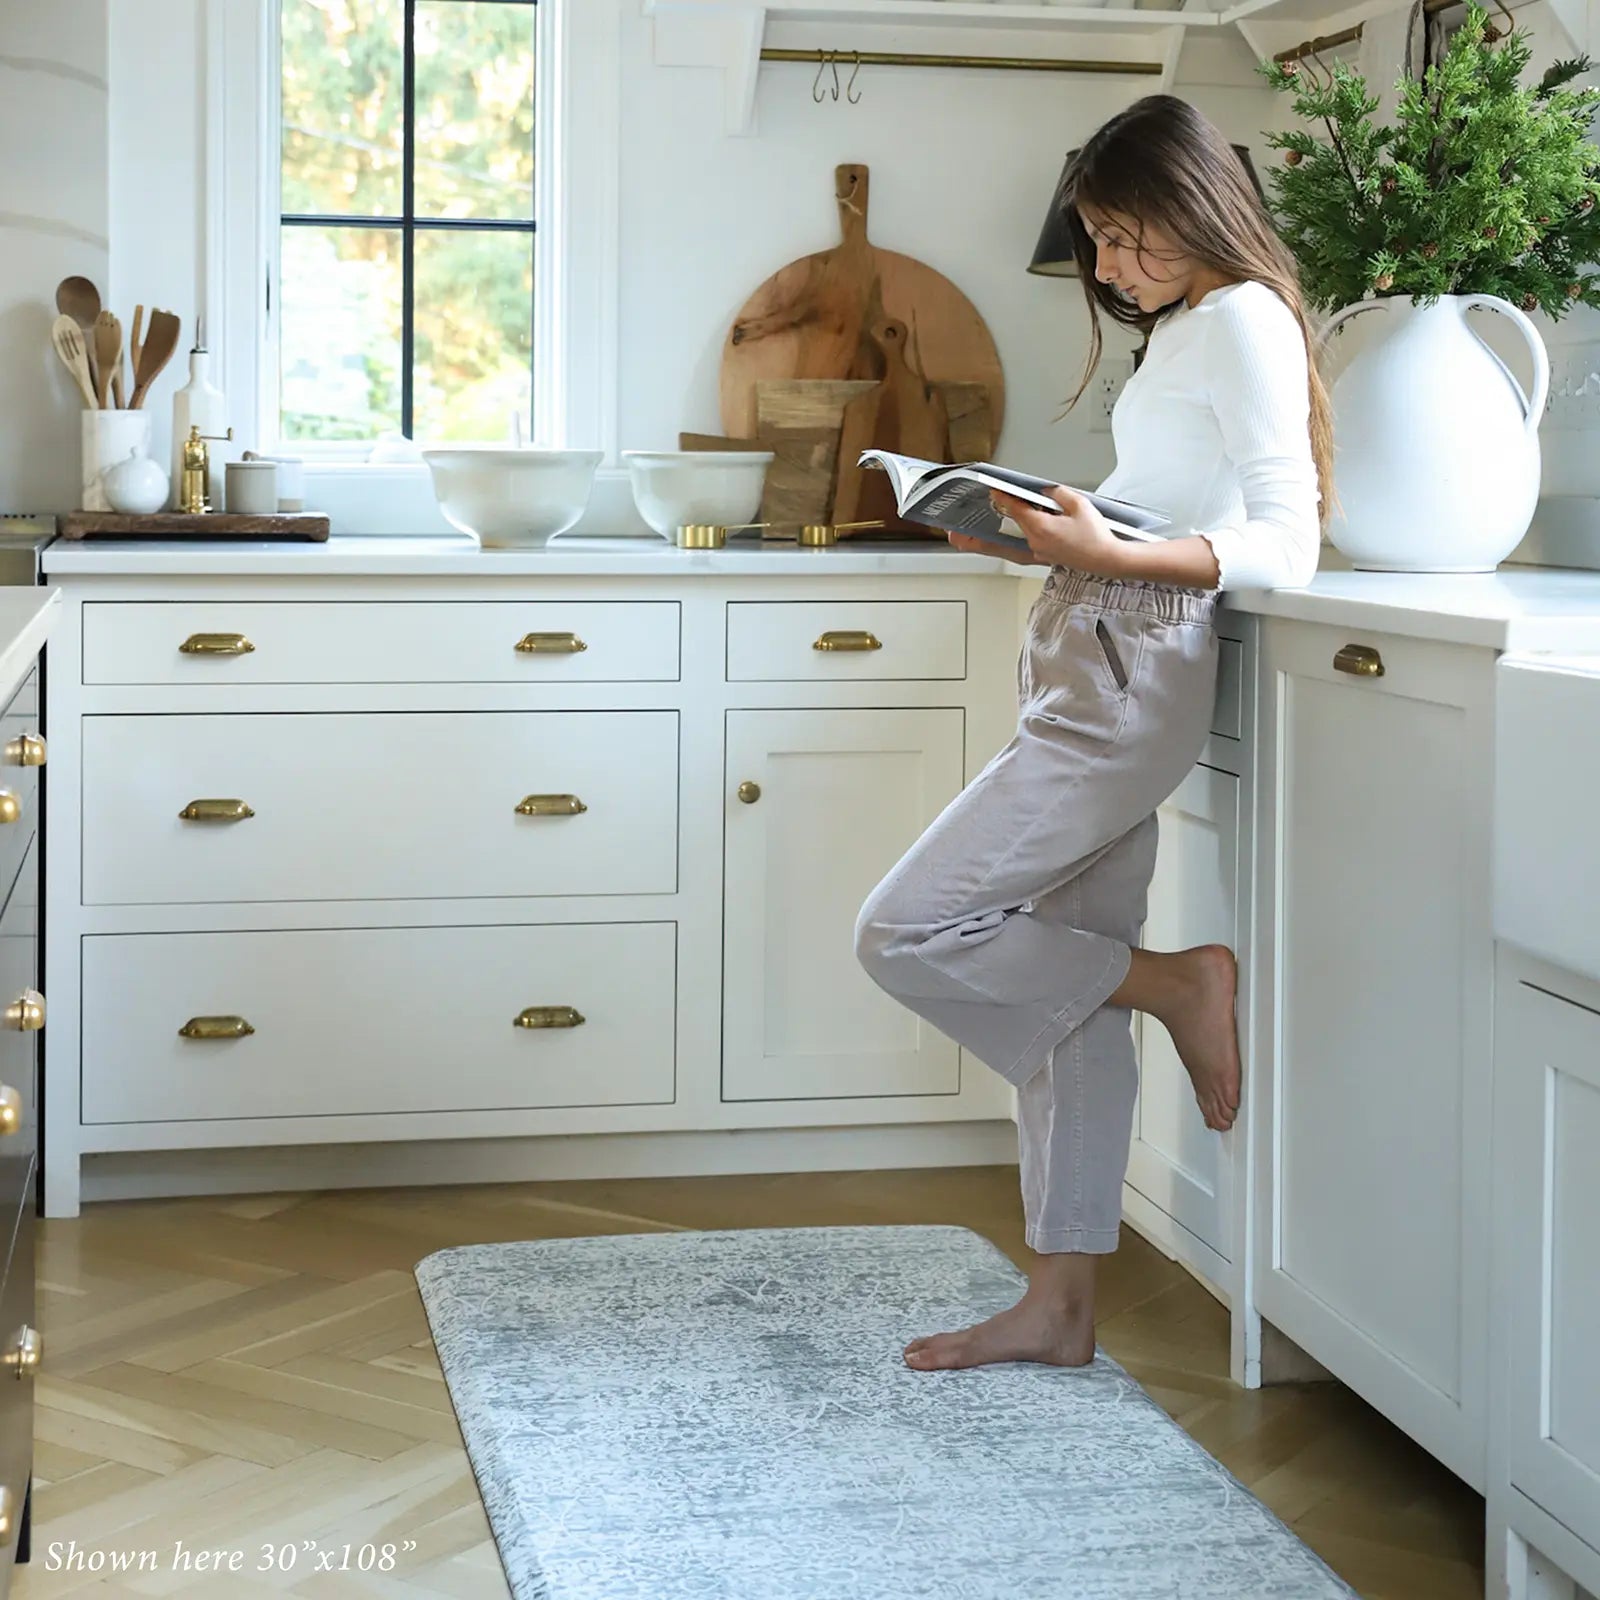 Gray neutral boho print kitchen mat shown with woman reading in kitchen on size 30x108